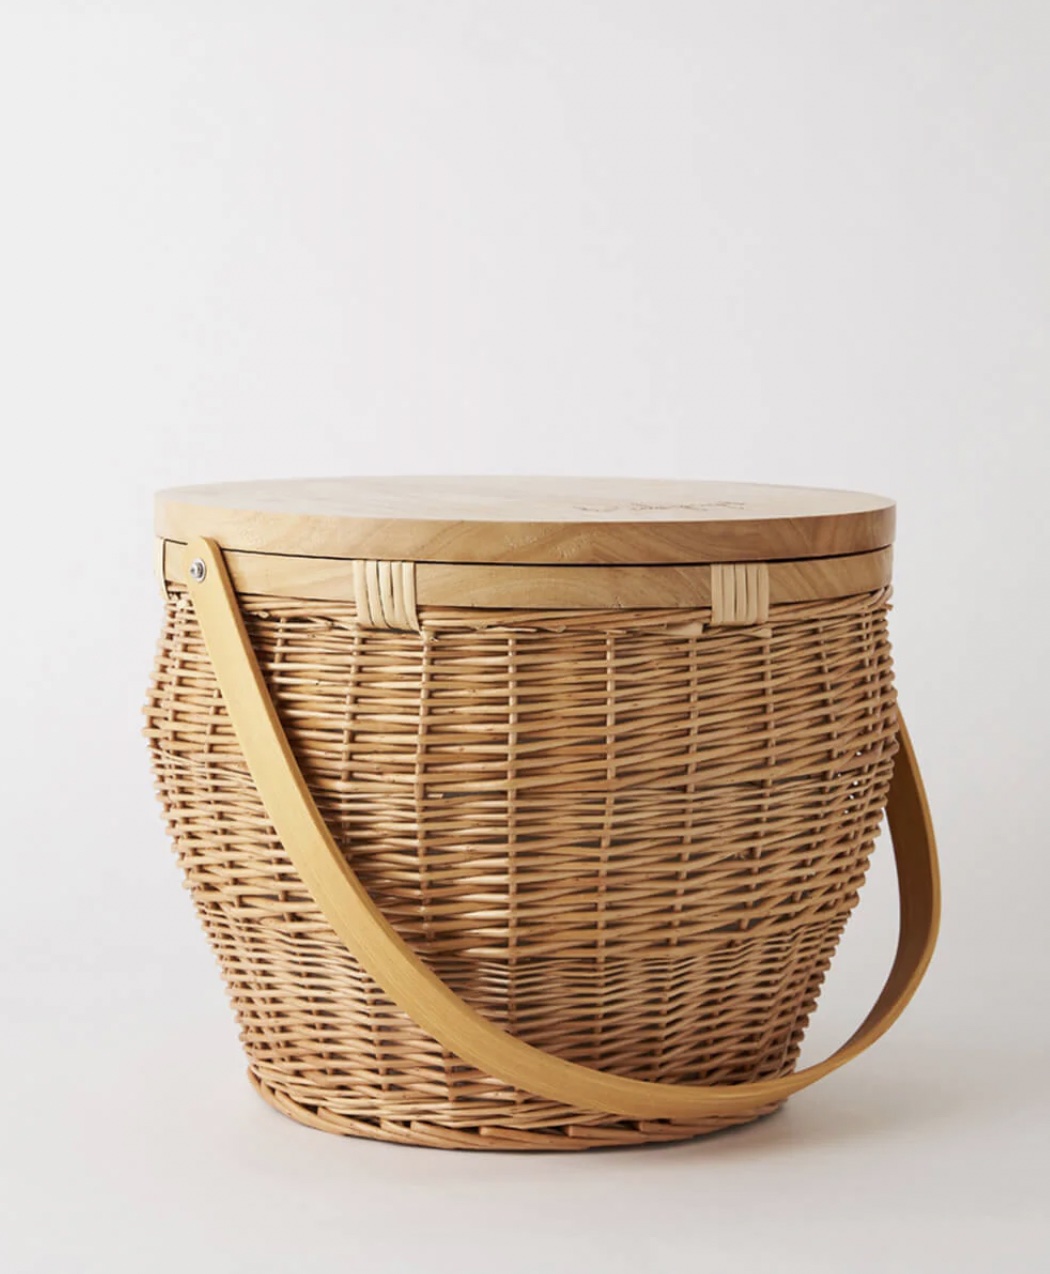 An image of The Beach People's Picnic Basket. 